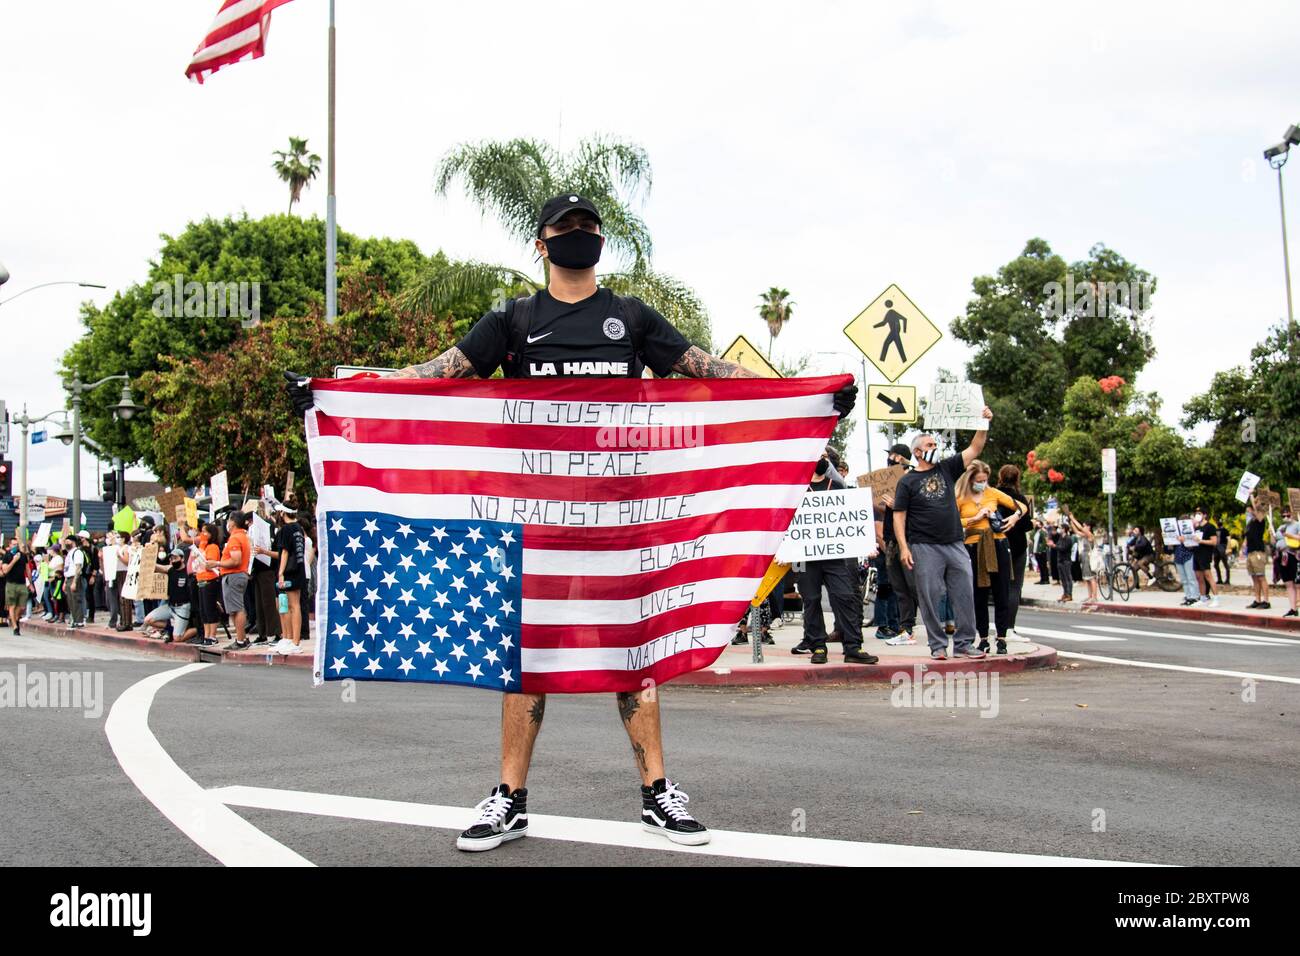 Man carrying an upside down American flag at a peaceful protest honoring George Floyd in Los Angeles, CA Stock Photo